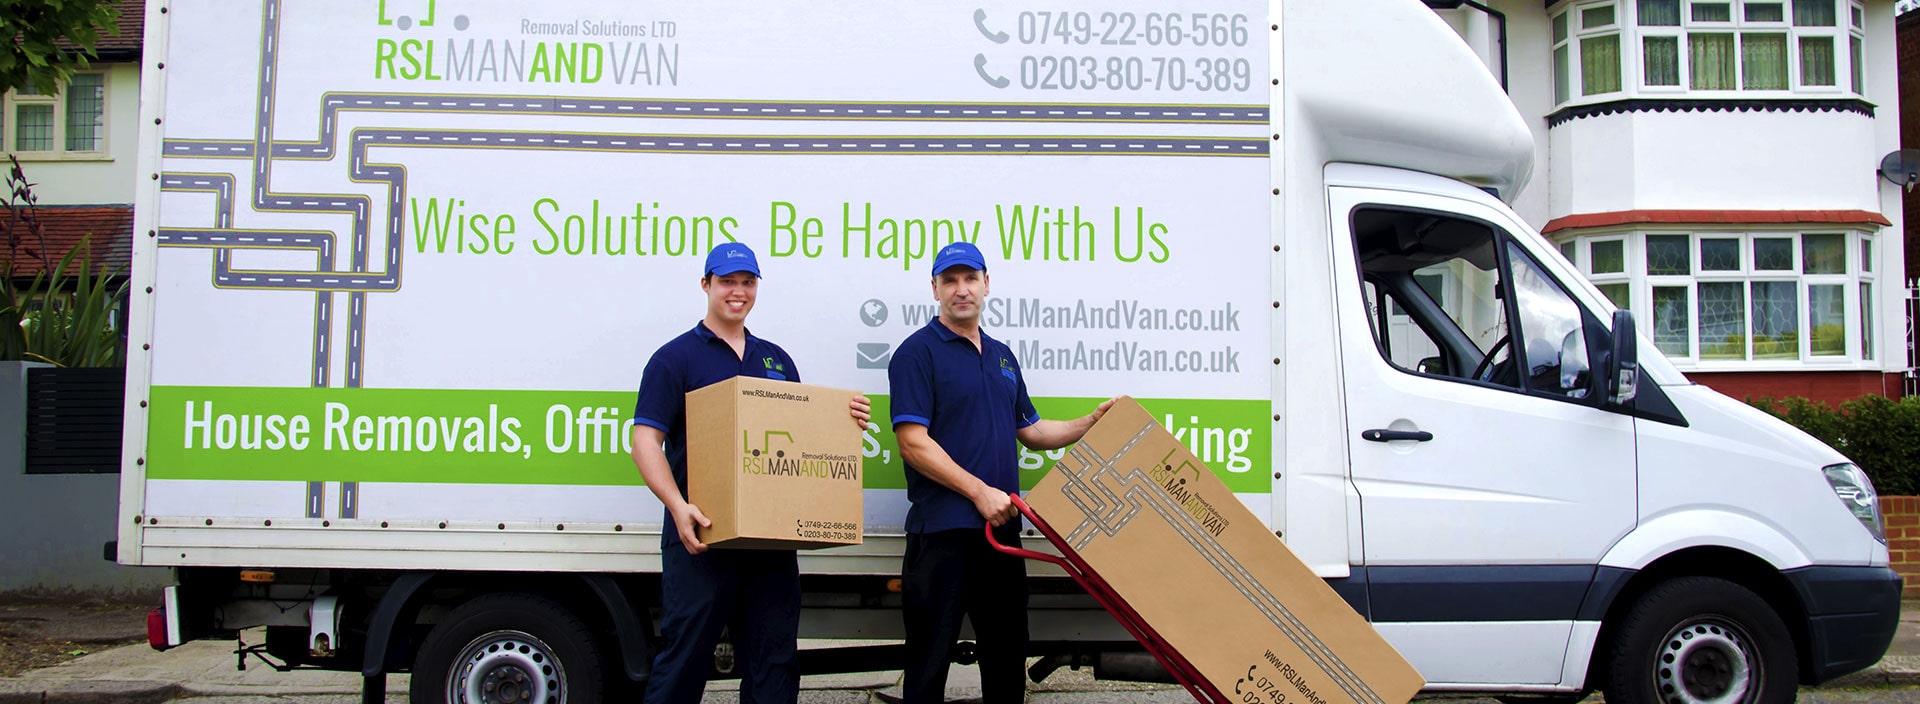 All About Removal Solutions LTD